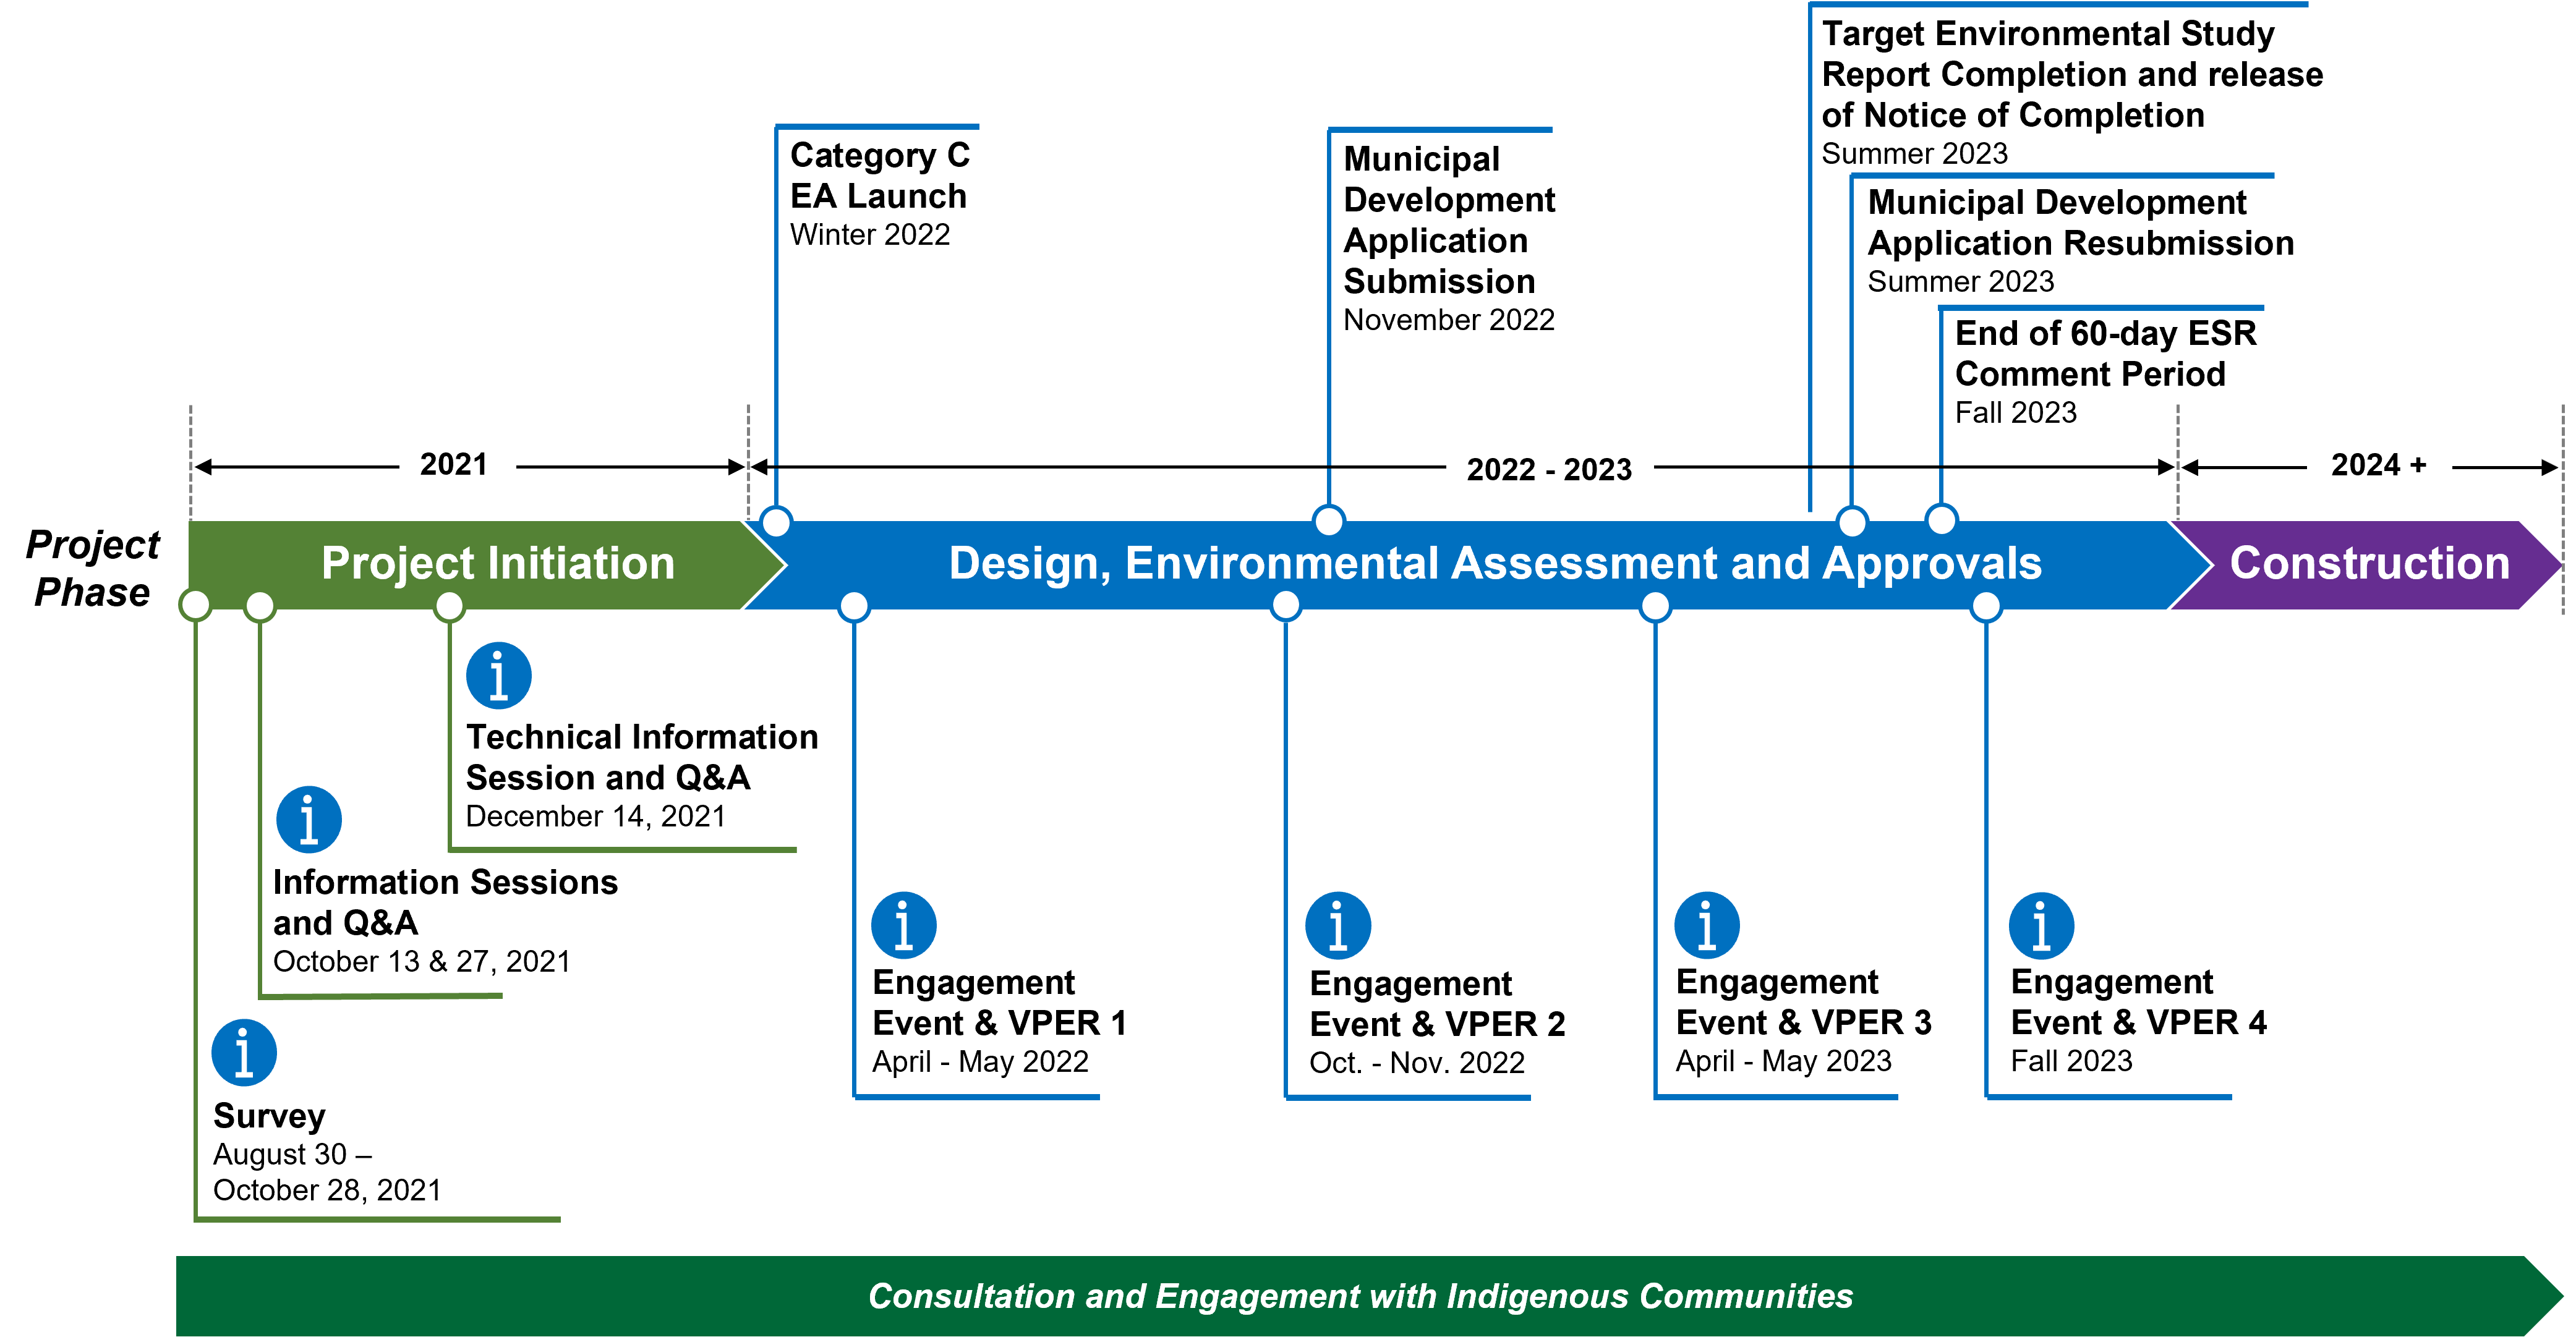 A project timeline showing key milestones along the three project phases that are information sharing, environmental assessment and design; and construction.